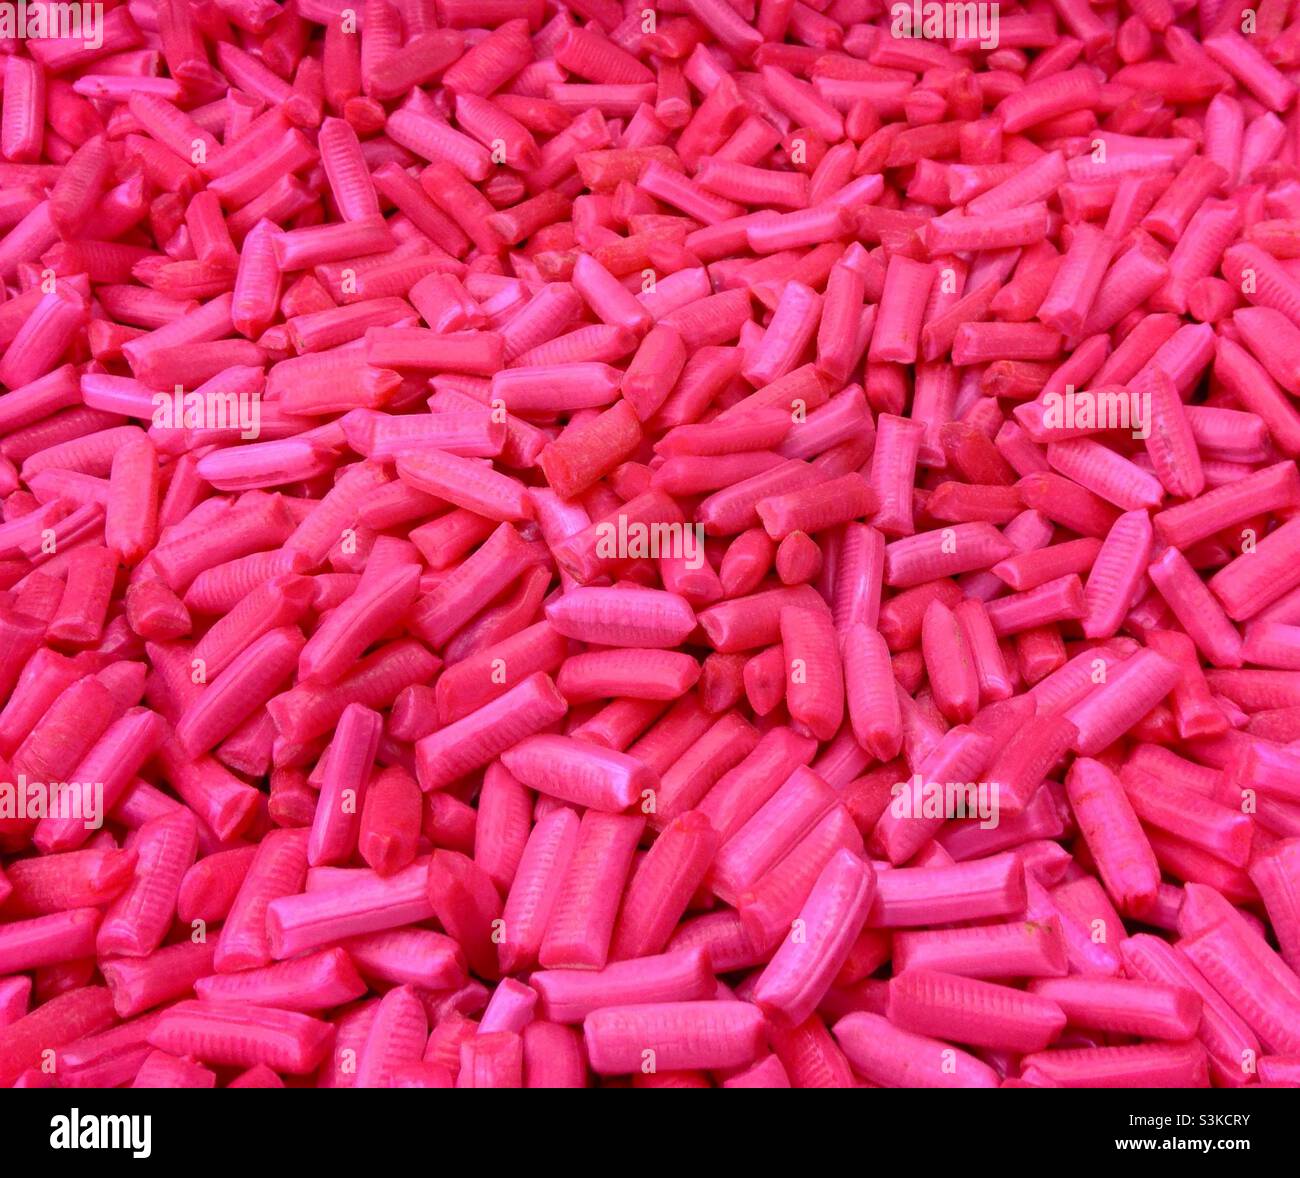 Bulk pink candy 'chicken bones' sold by the grams or ounces Stock Photo